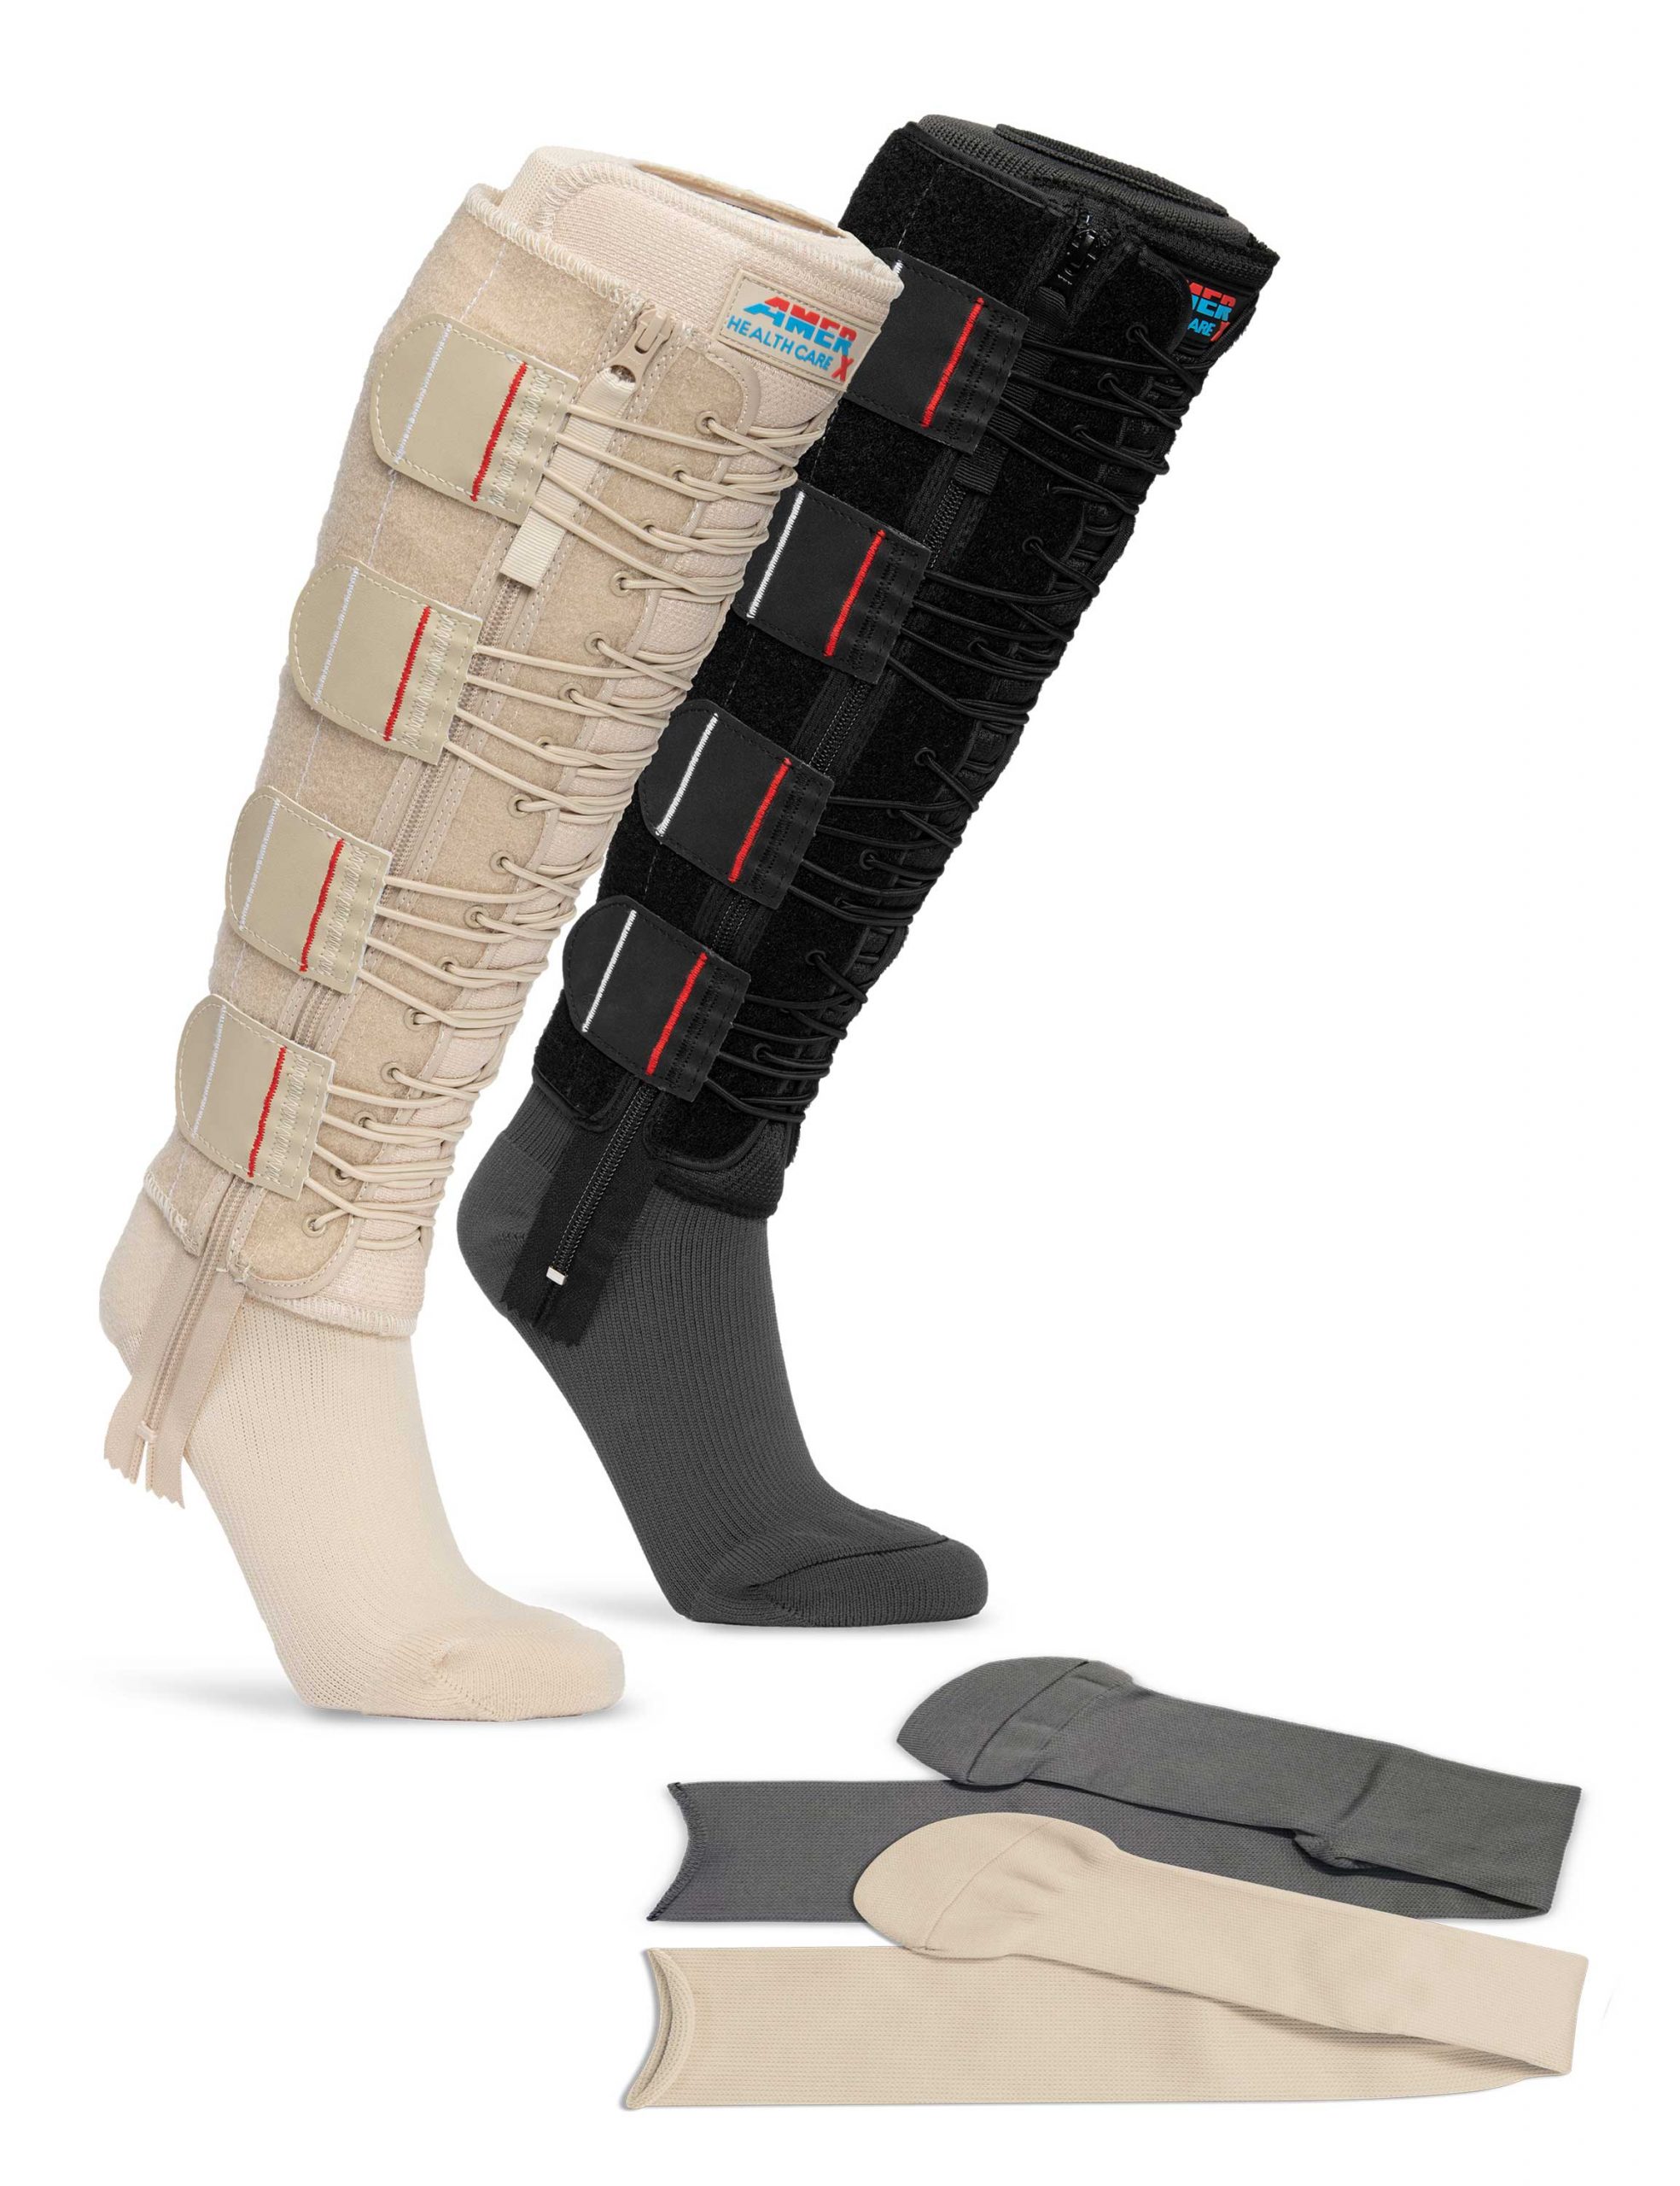 Image of tan and black EXTREMIT-EASE Compression Garments, tan and gray EXTREMIT-EASE Garment Liners, representing all options available with the the EXTREMIT-EASE Compression Therapy Starter Pack.